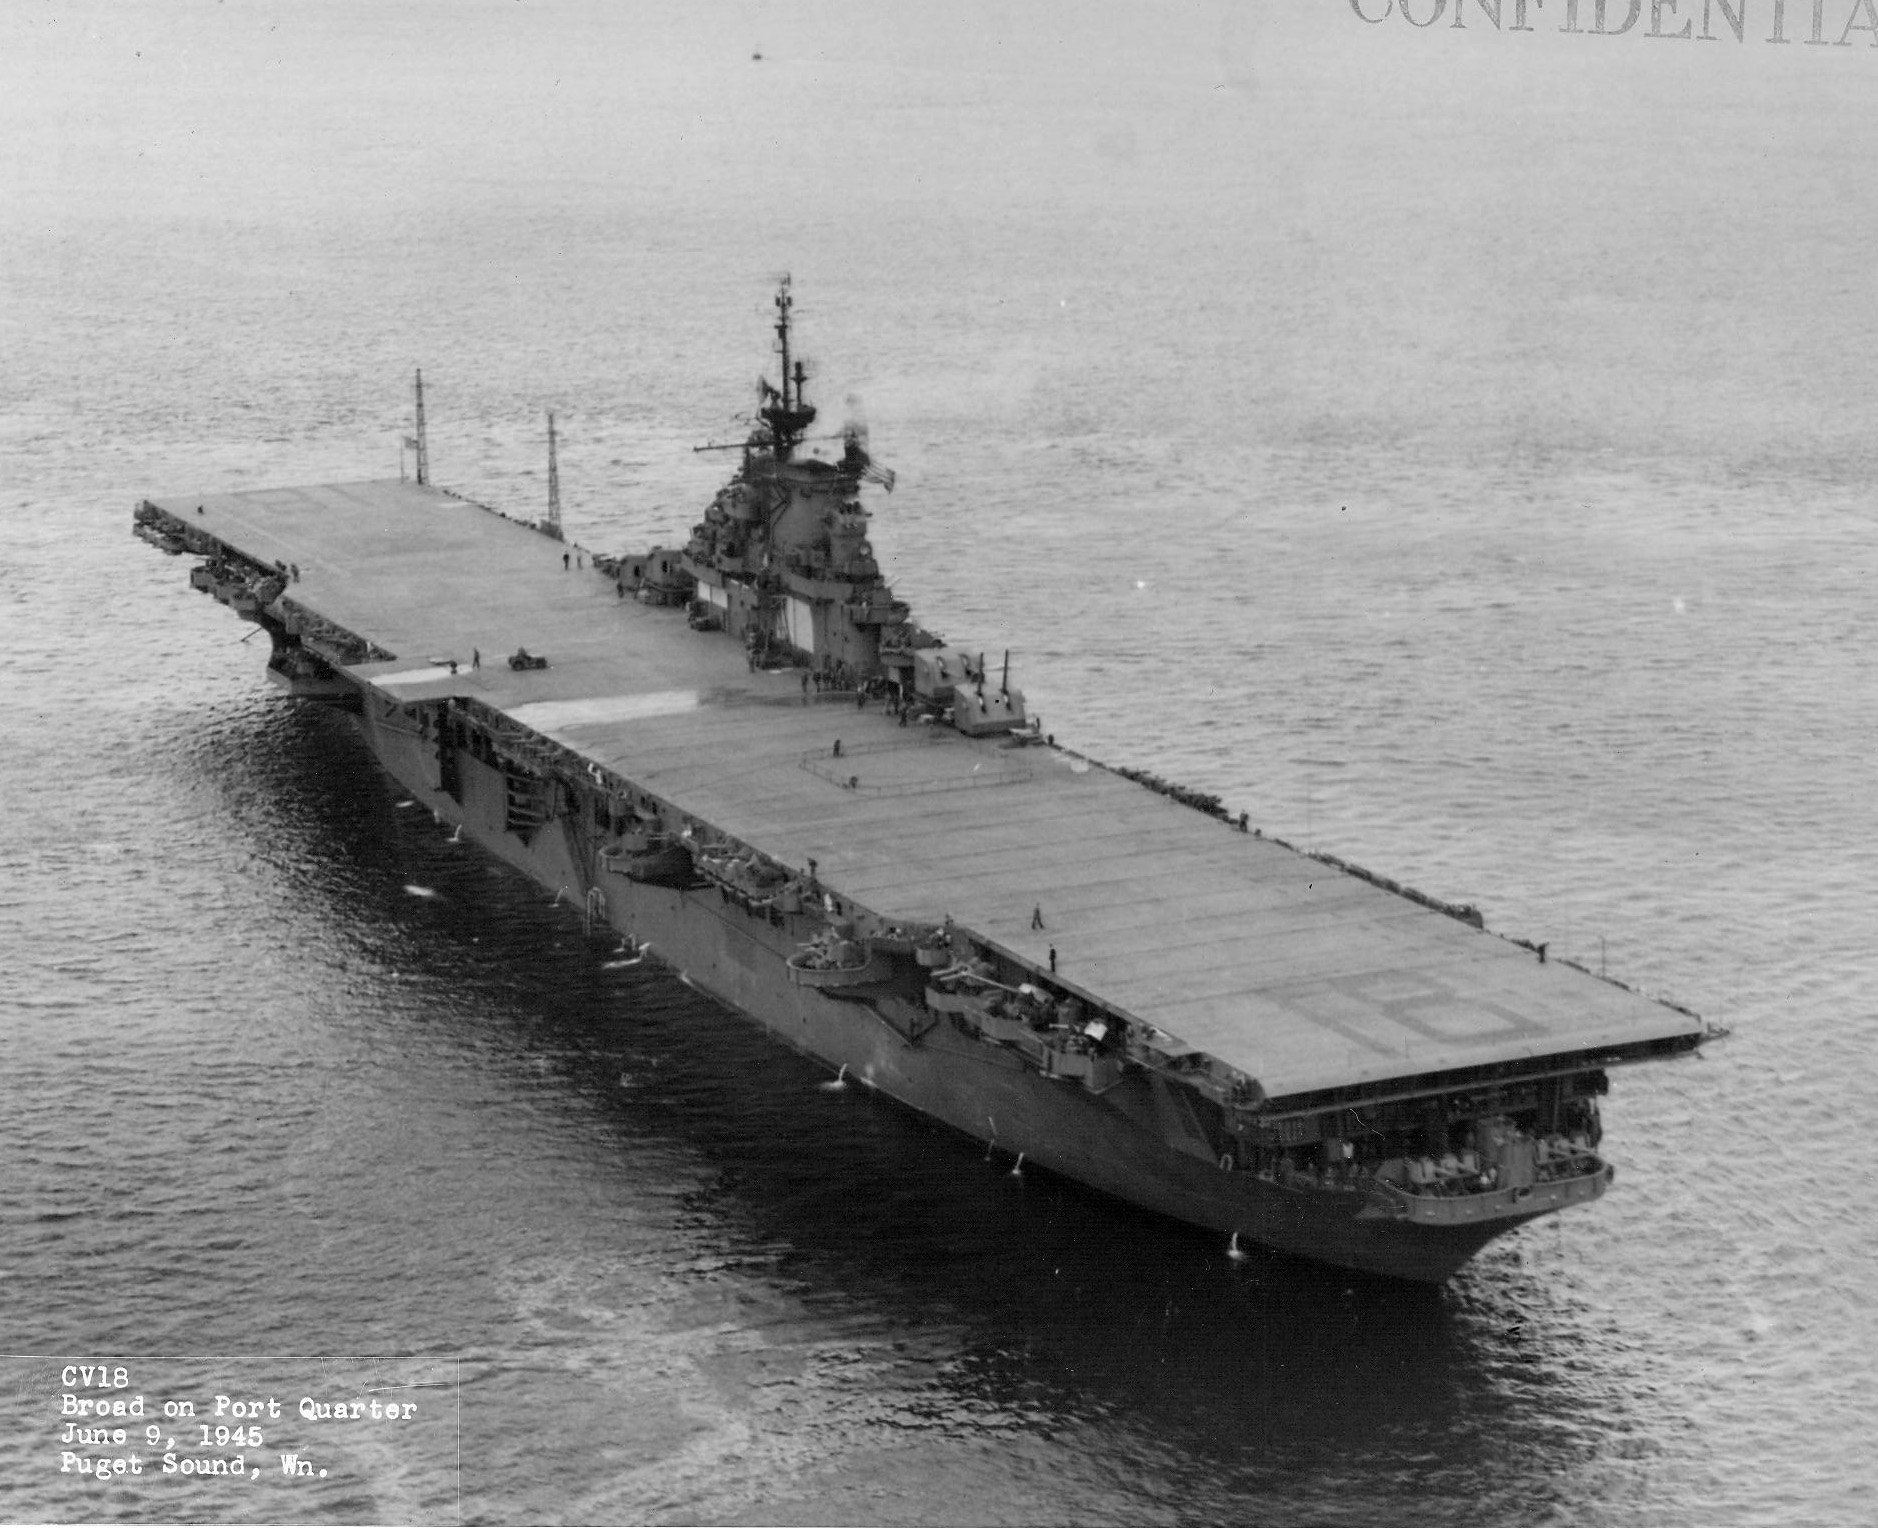 USS Wasp (Essex-class) just before departing Puget Sound Navy Yard, Bremerton, Washington, United States bound for San Francisco, California, 9 Jun 1945. Note new Measure 21 paint scheme, all over sea blue. Photo 3 of 5